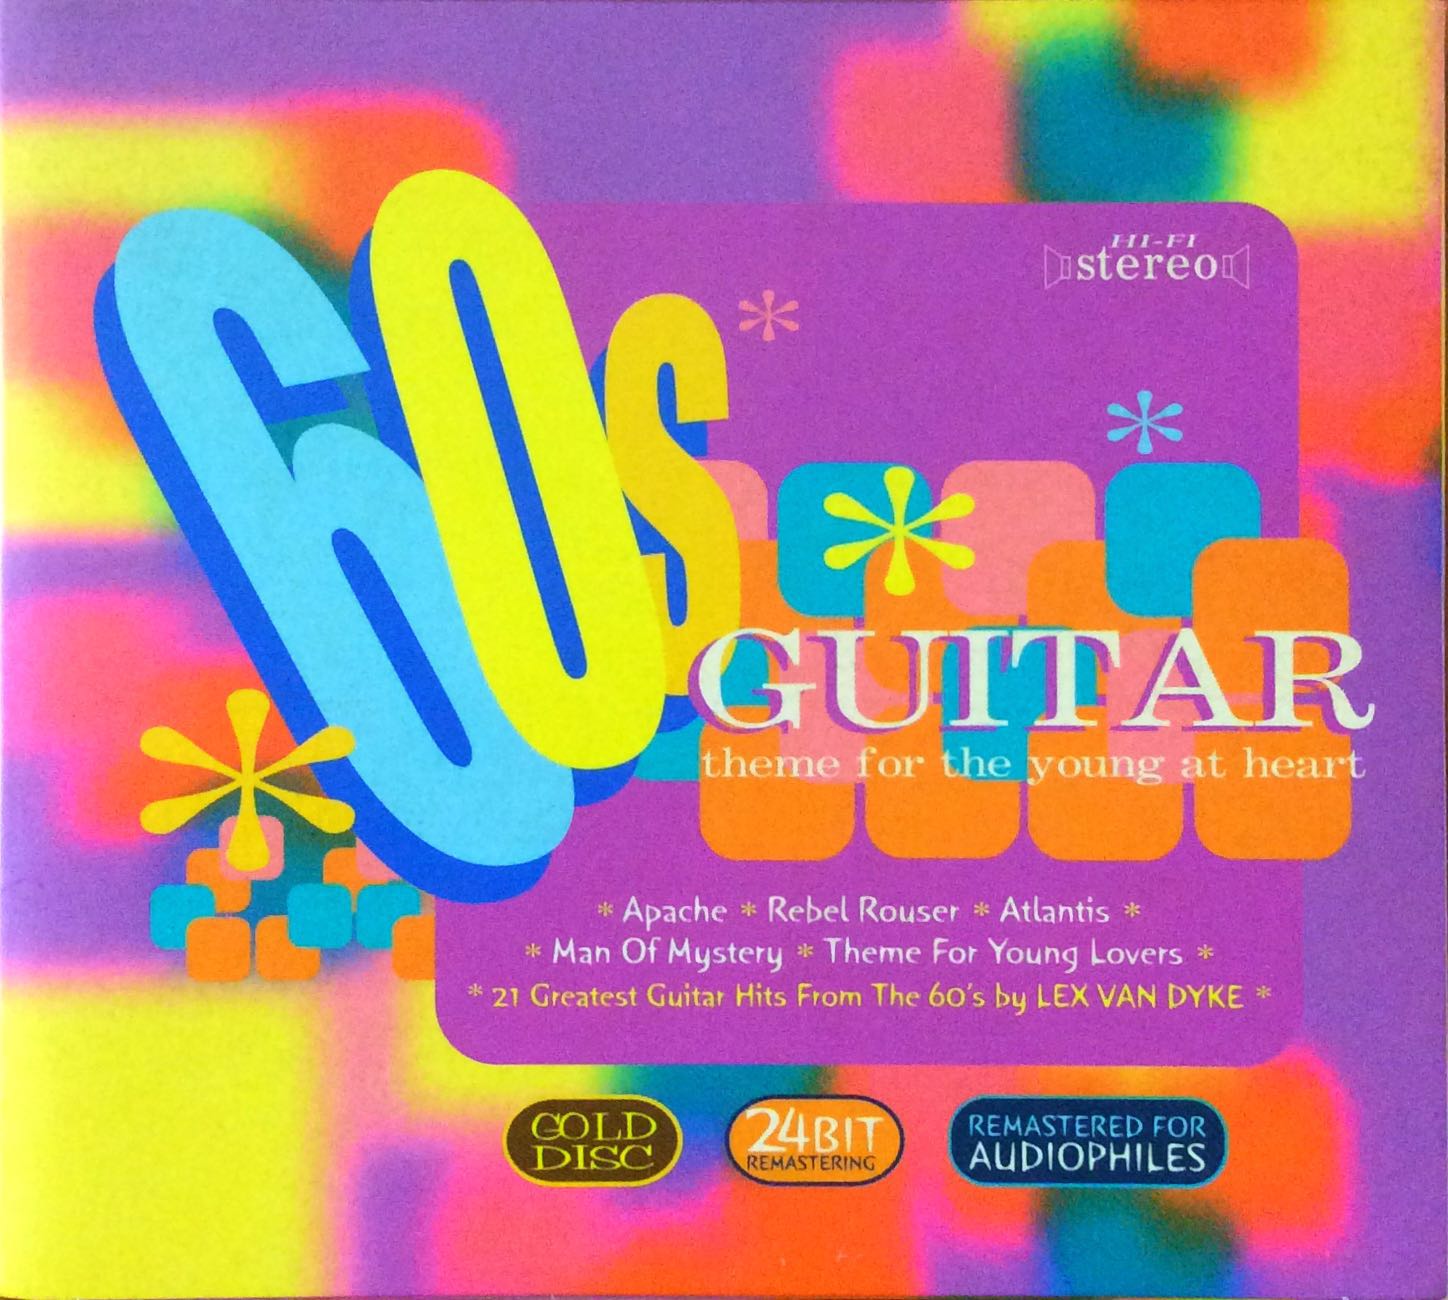 60s GUITAR Theme For The Young Heart - Lex Vandyke Audiophile 24bit Remastering CD